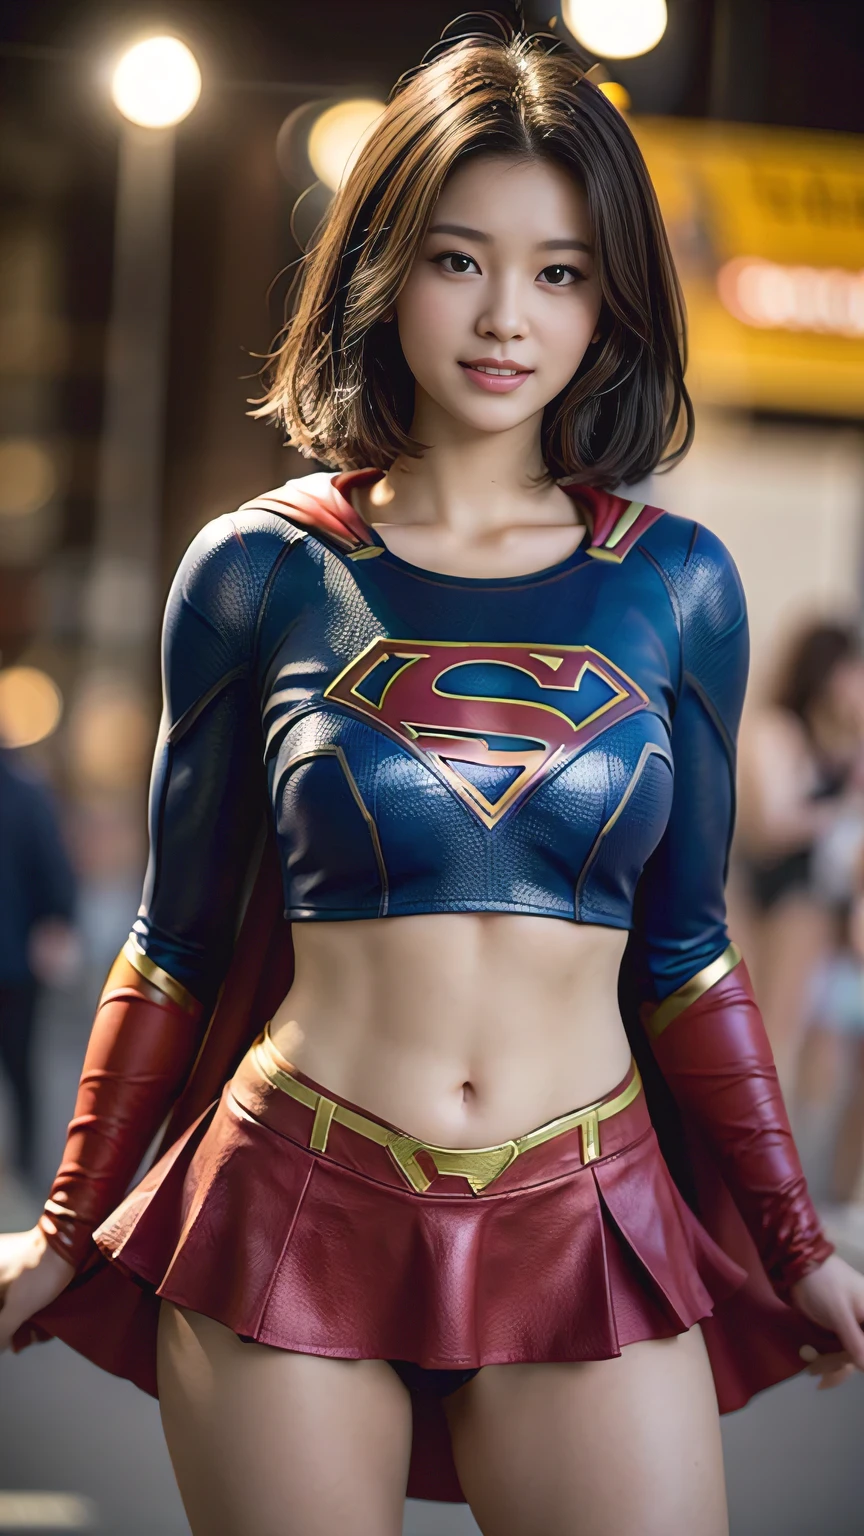 4K, (realistic:1.37), best quality, table top, Ultra A high resolution, Healthy skin tone, break, dynamic pose, alone, 21 years old, cinematic, fighting stance, (((she&#39;I&#39;m wearing DC&#39;supergirl costume.))), Red very short skirt, The wind blows. The skirt flutters, ((S mark on chest)), Open your chest, Long Little Red Riding Hood, she의 아름다운 얼굴에 겁 없는 미소가 나타난다., Light brown short hair, elegant, Beautiful body like an athlete, (((매우 big bust))), ((Non-breaststroke)), I can see my belly button, 매우 윤기I am 지성 피부, big bust, big ass, open your legs, ((Please show me your panty line)), I am, In a city in ruins, break, Highly detailed beautiful eyes and face, Detailed fabric texture, 엄청나게 세밀하고 realistic 피부 질감, (The right balance of the body), Top-quality lighting that does not darken your face even when backlit, looking straight at the camera, low position camera shot, 